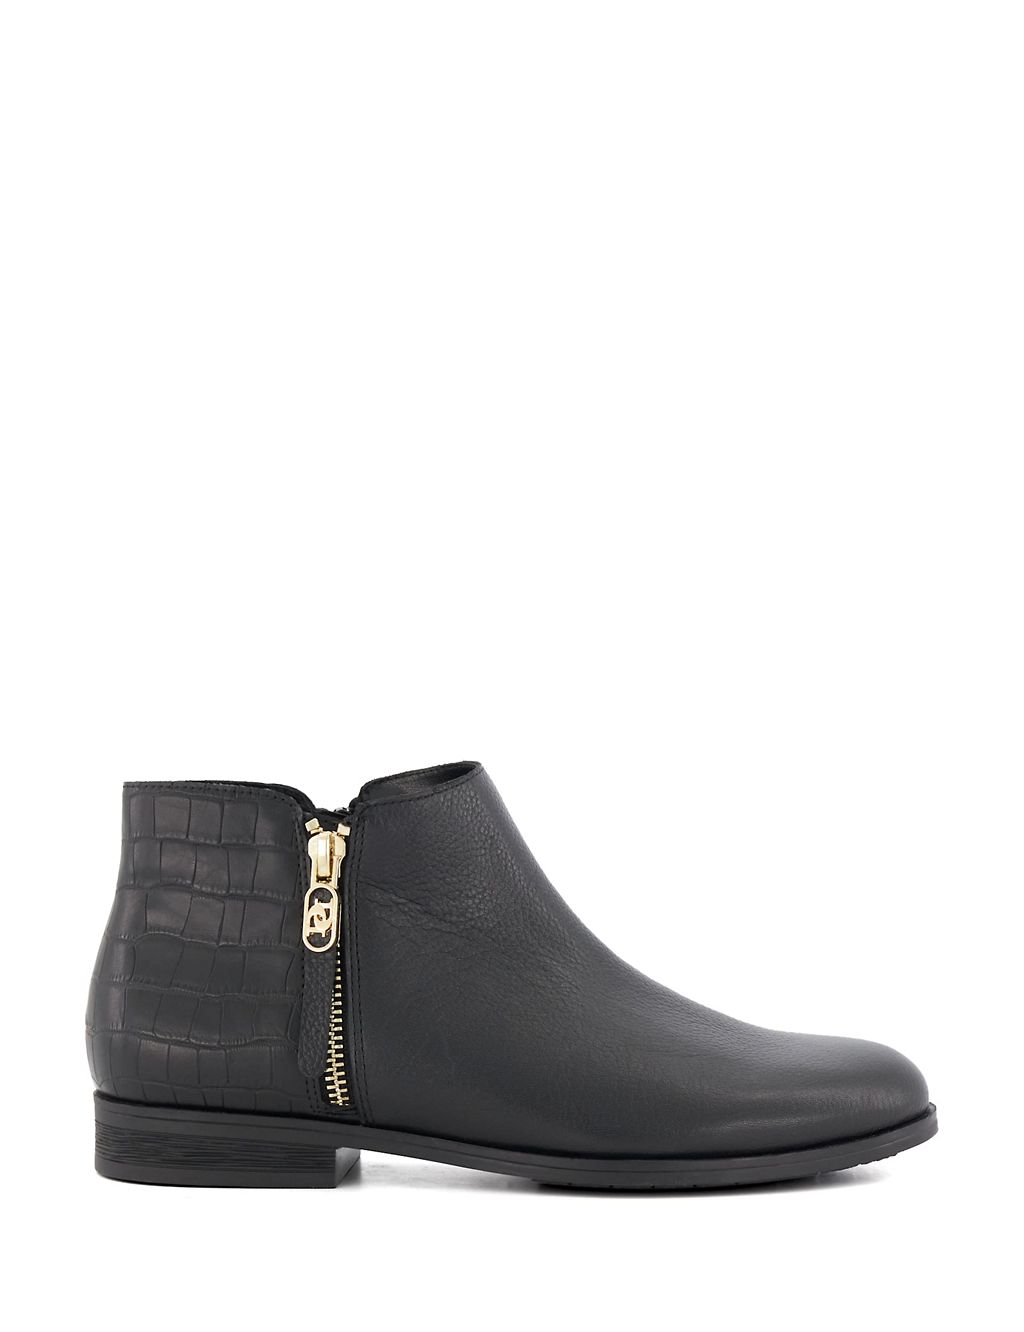 Leather Croc Flat Ankle Boots | Dune London | M&S